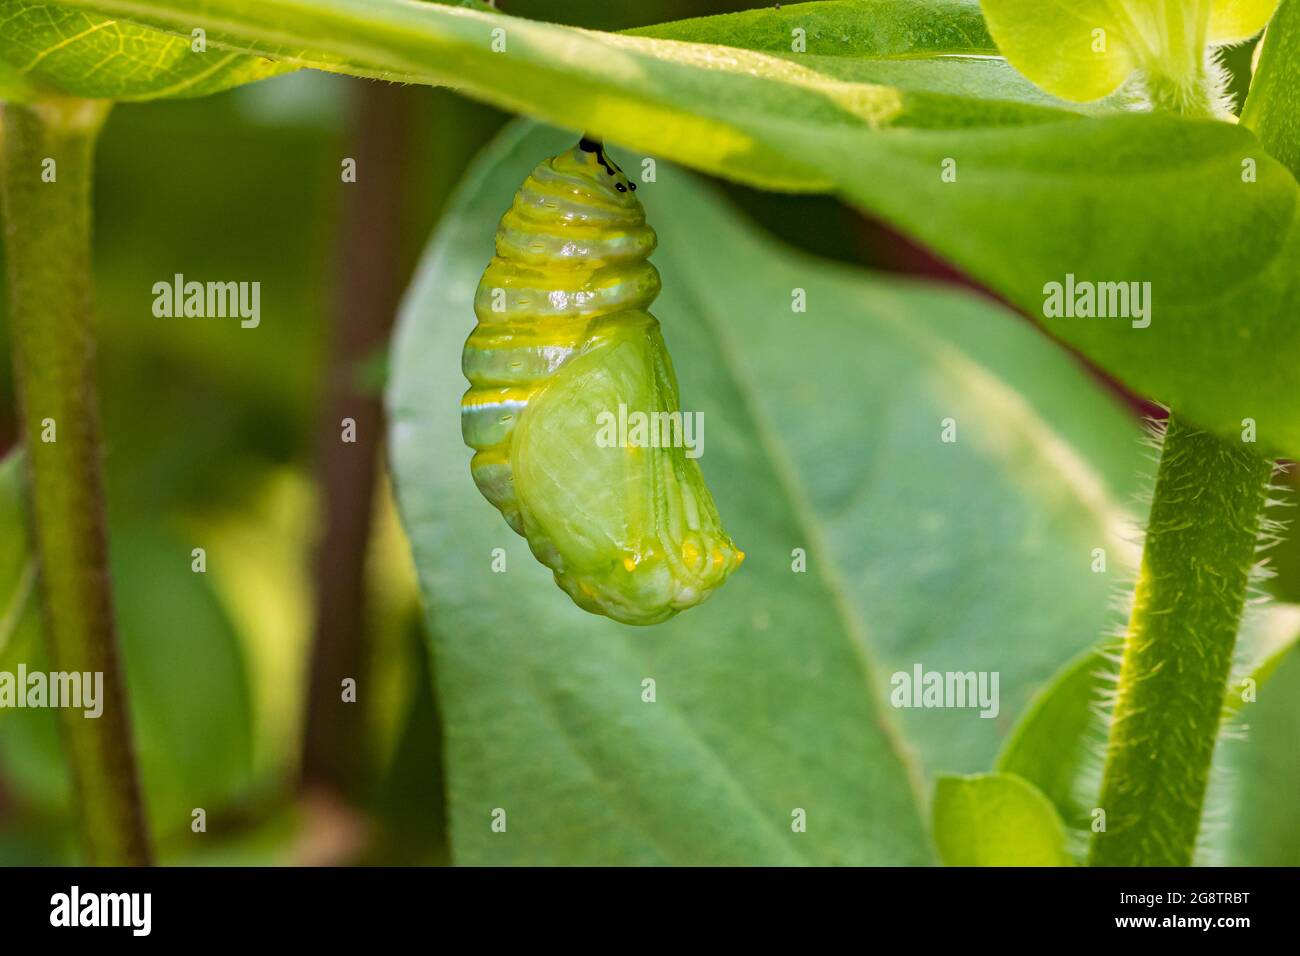 Monarch butterfly caterpillar pupating into chrysalis. Butterfly conservation, life cycle, habitat preservation, and backyard flower garden concept. Stock Photo